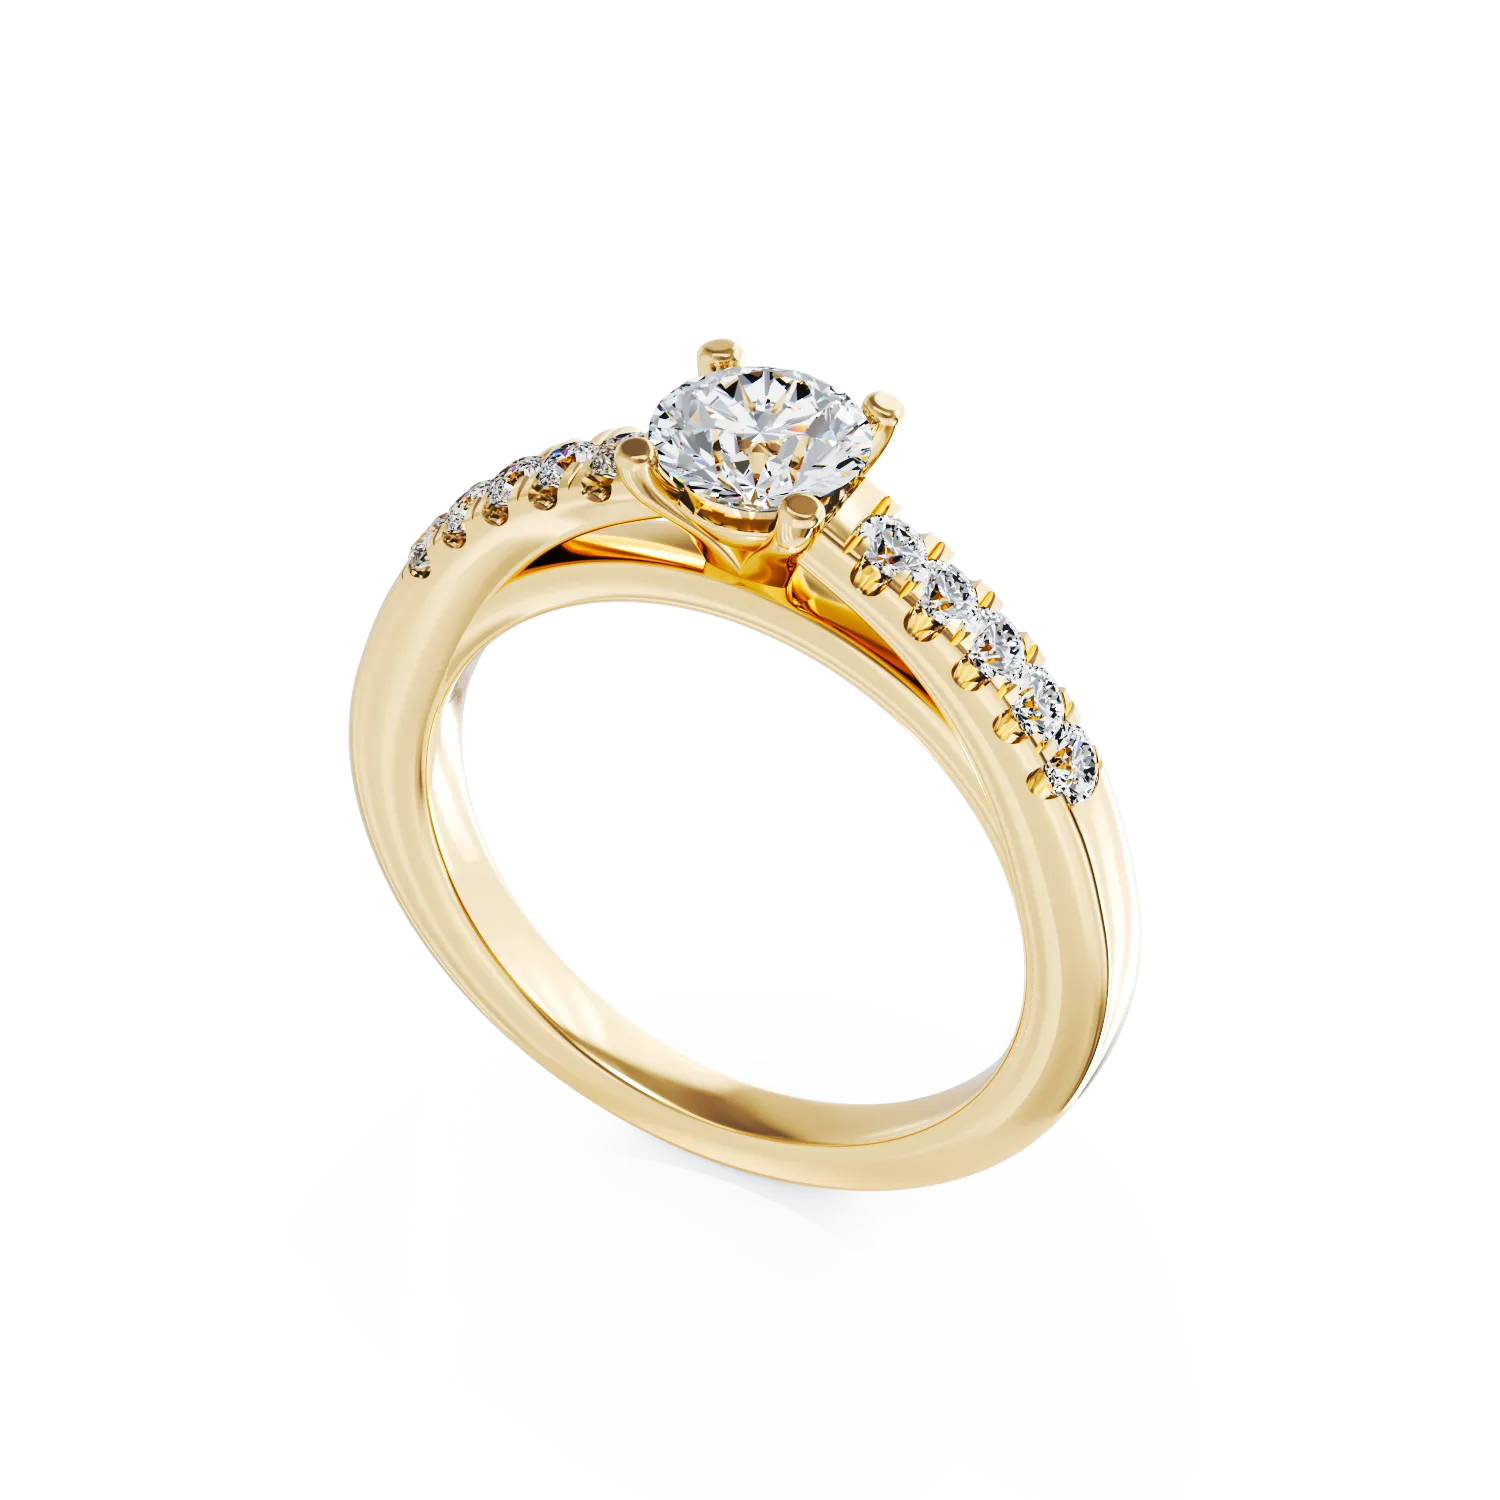 18K yellow gold engagement ring with 0.5ct diamond and 0.15ct diamonds